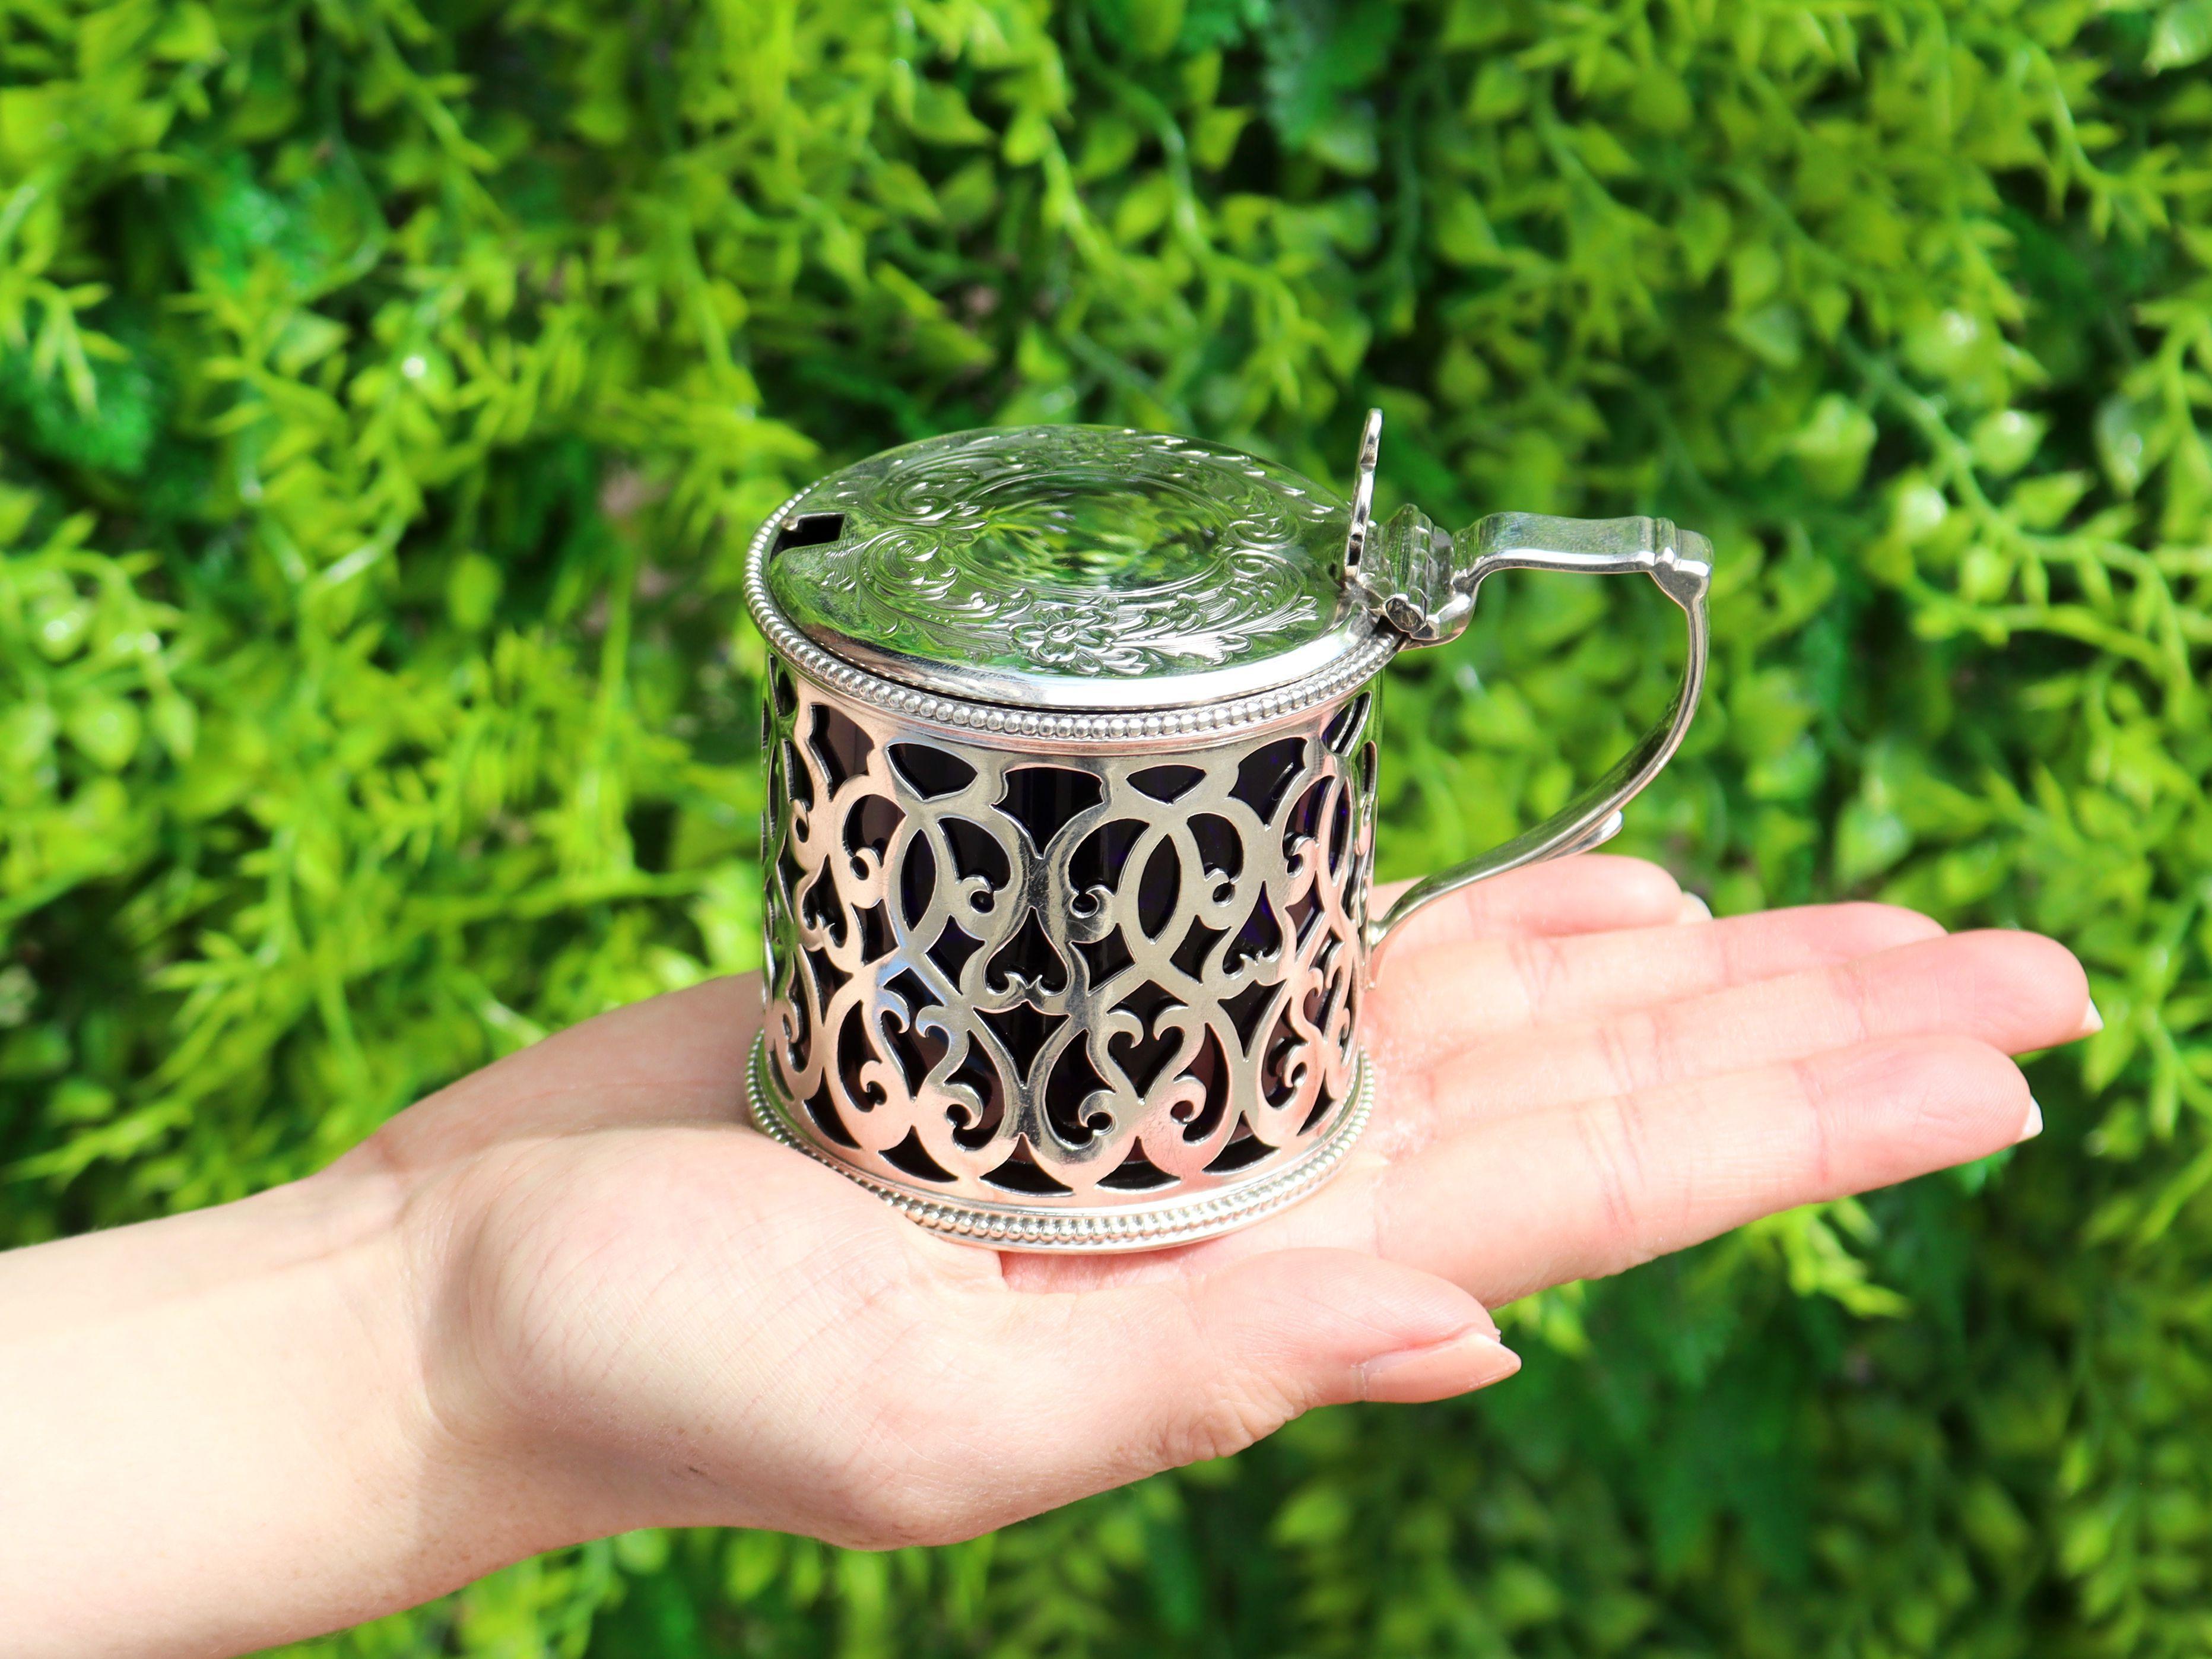 An exceptional, fine and impressive antique Victorian English sterling silver mustard pot; an addition to our silver cruets/condiments collection.

This exceptional antique Victorian sterling silver mustard pot has a plain cylindrical form.

The